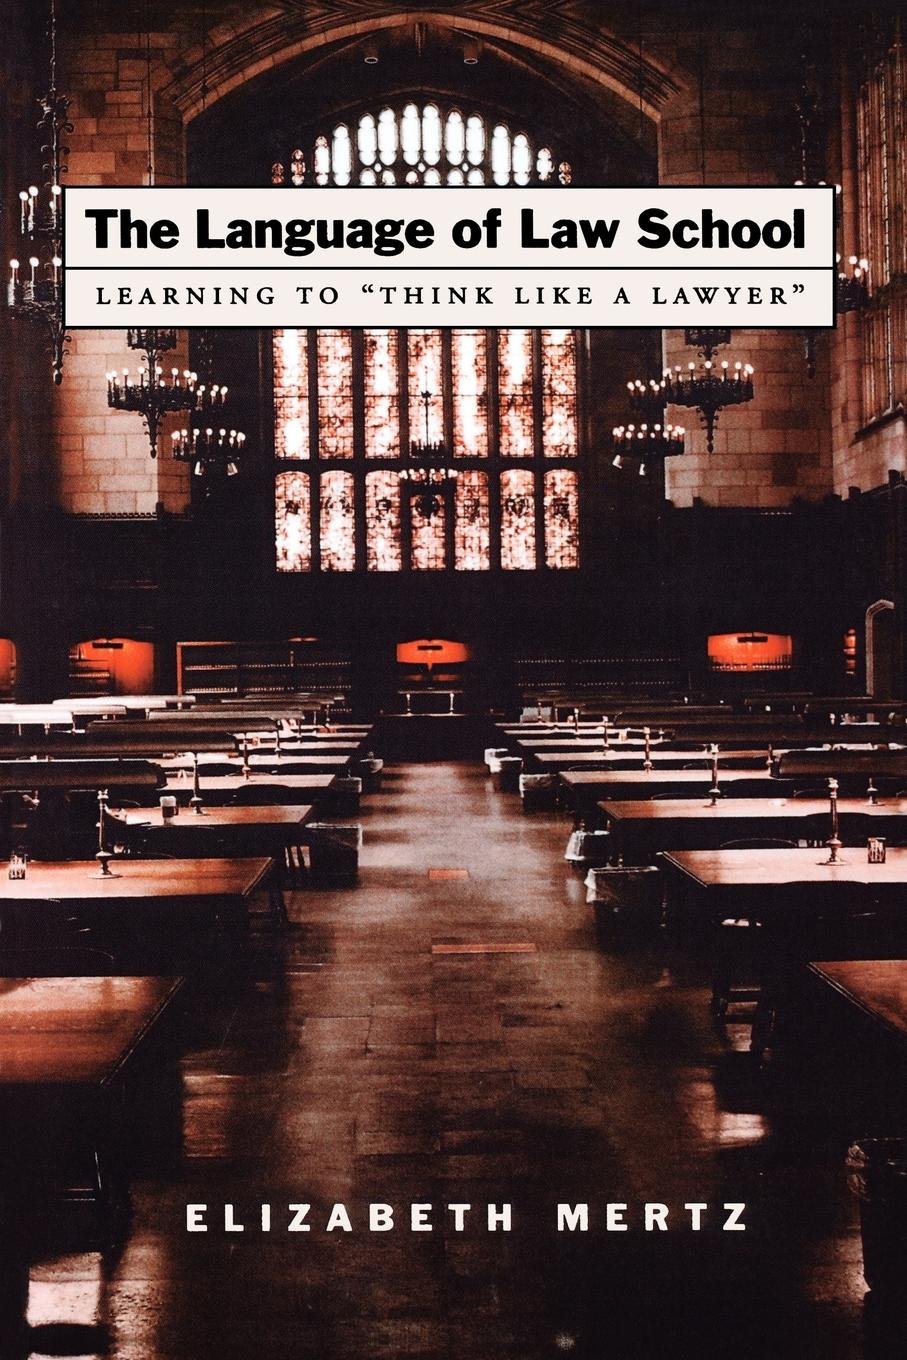 The Language of Law School: Learning to "Think Like a Lawyer" (Book Review)